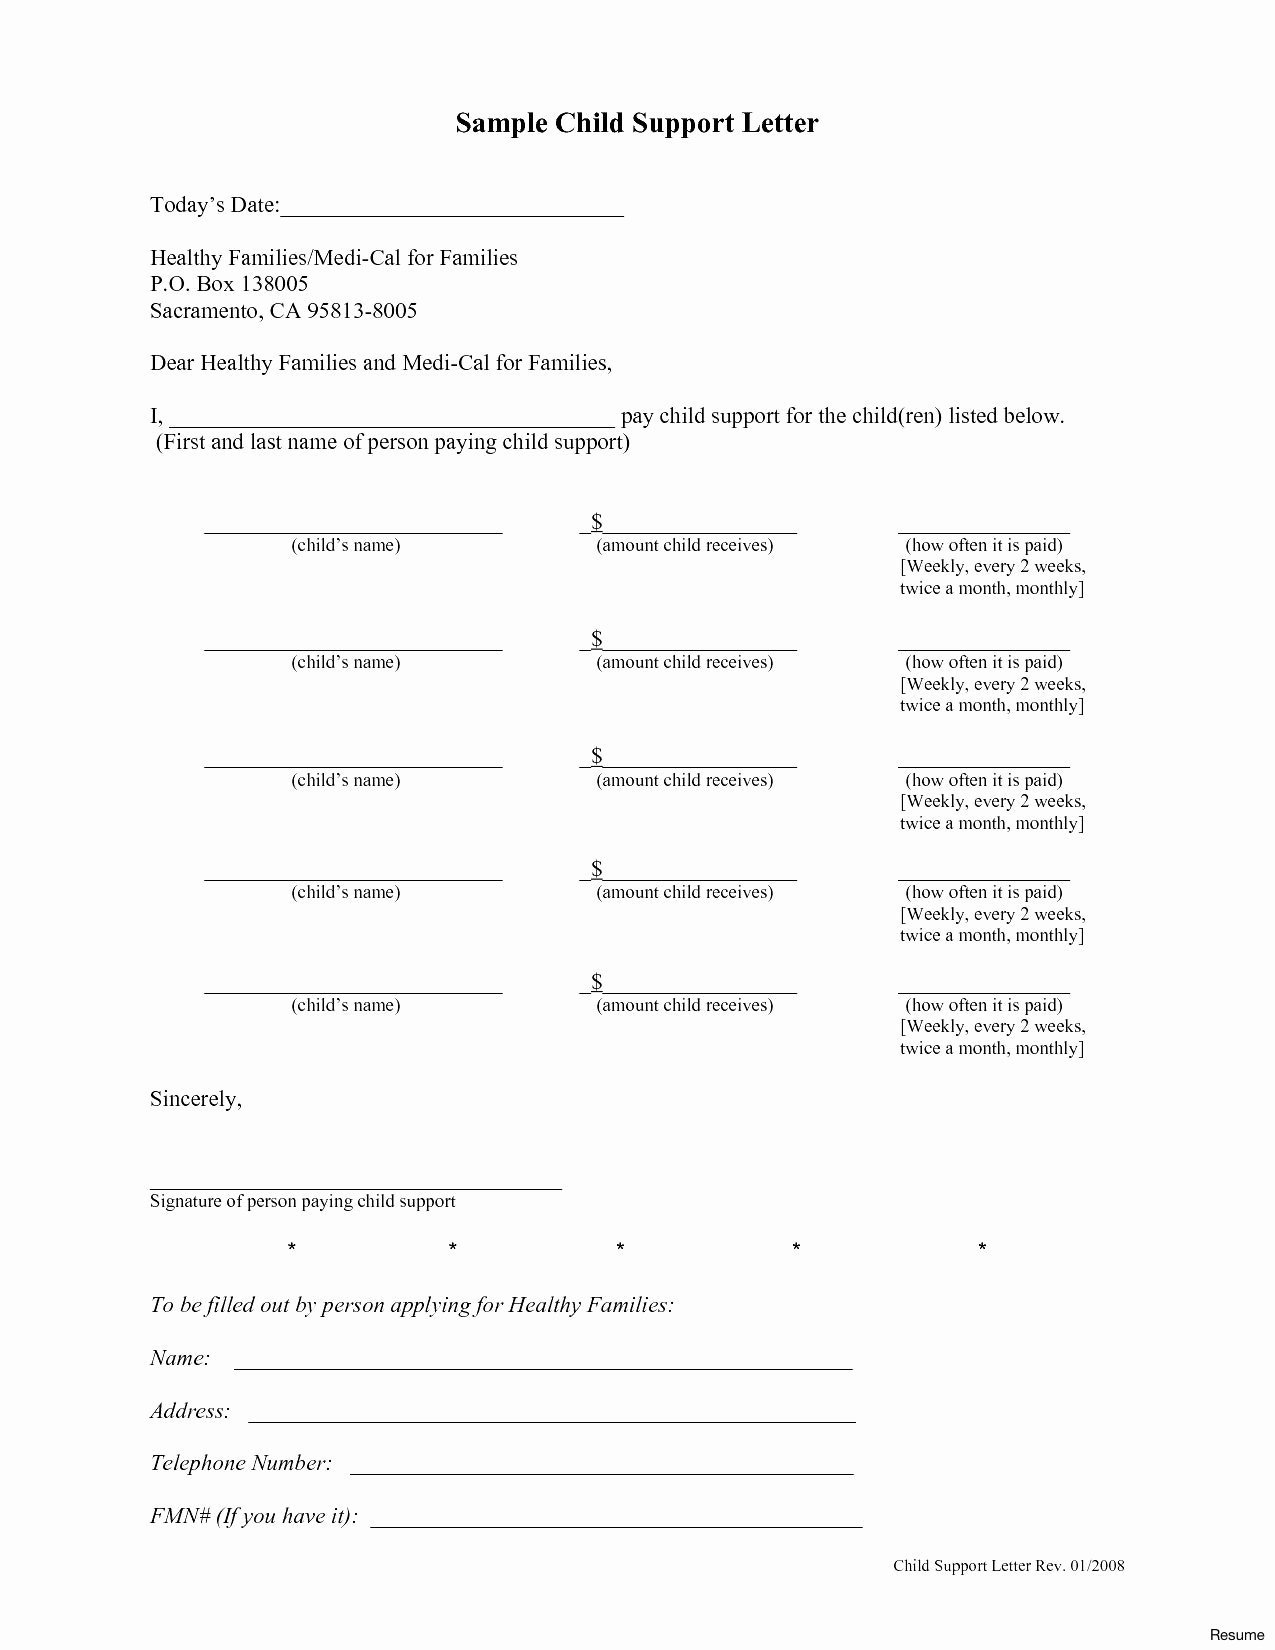 Child Support Letters Sample